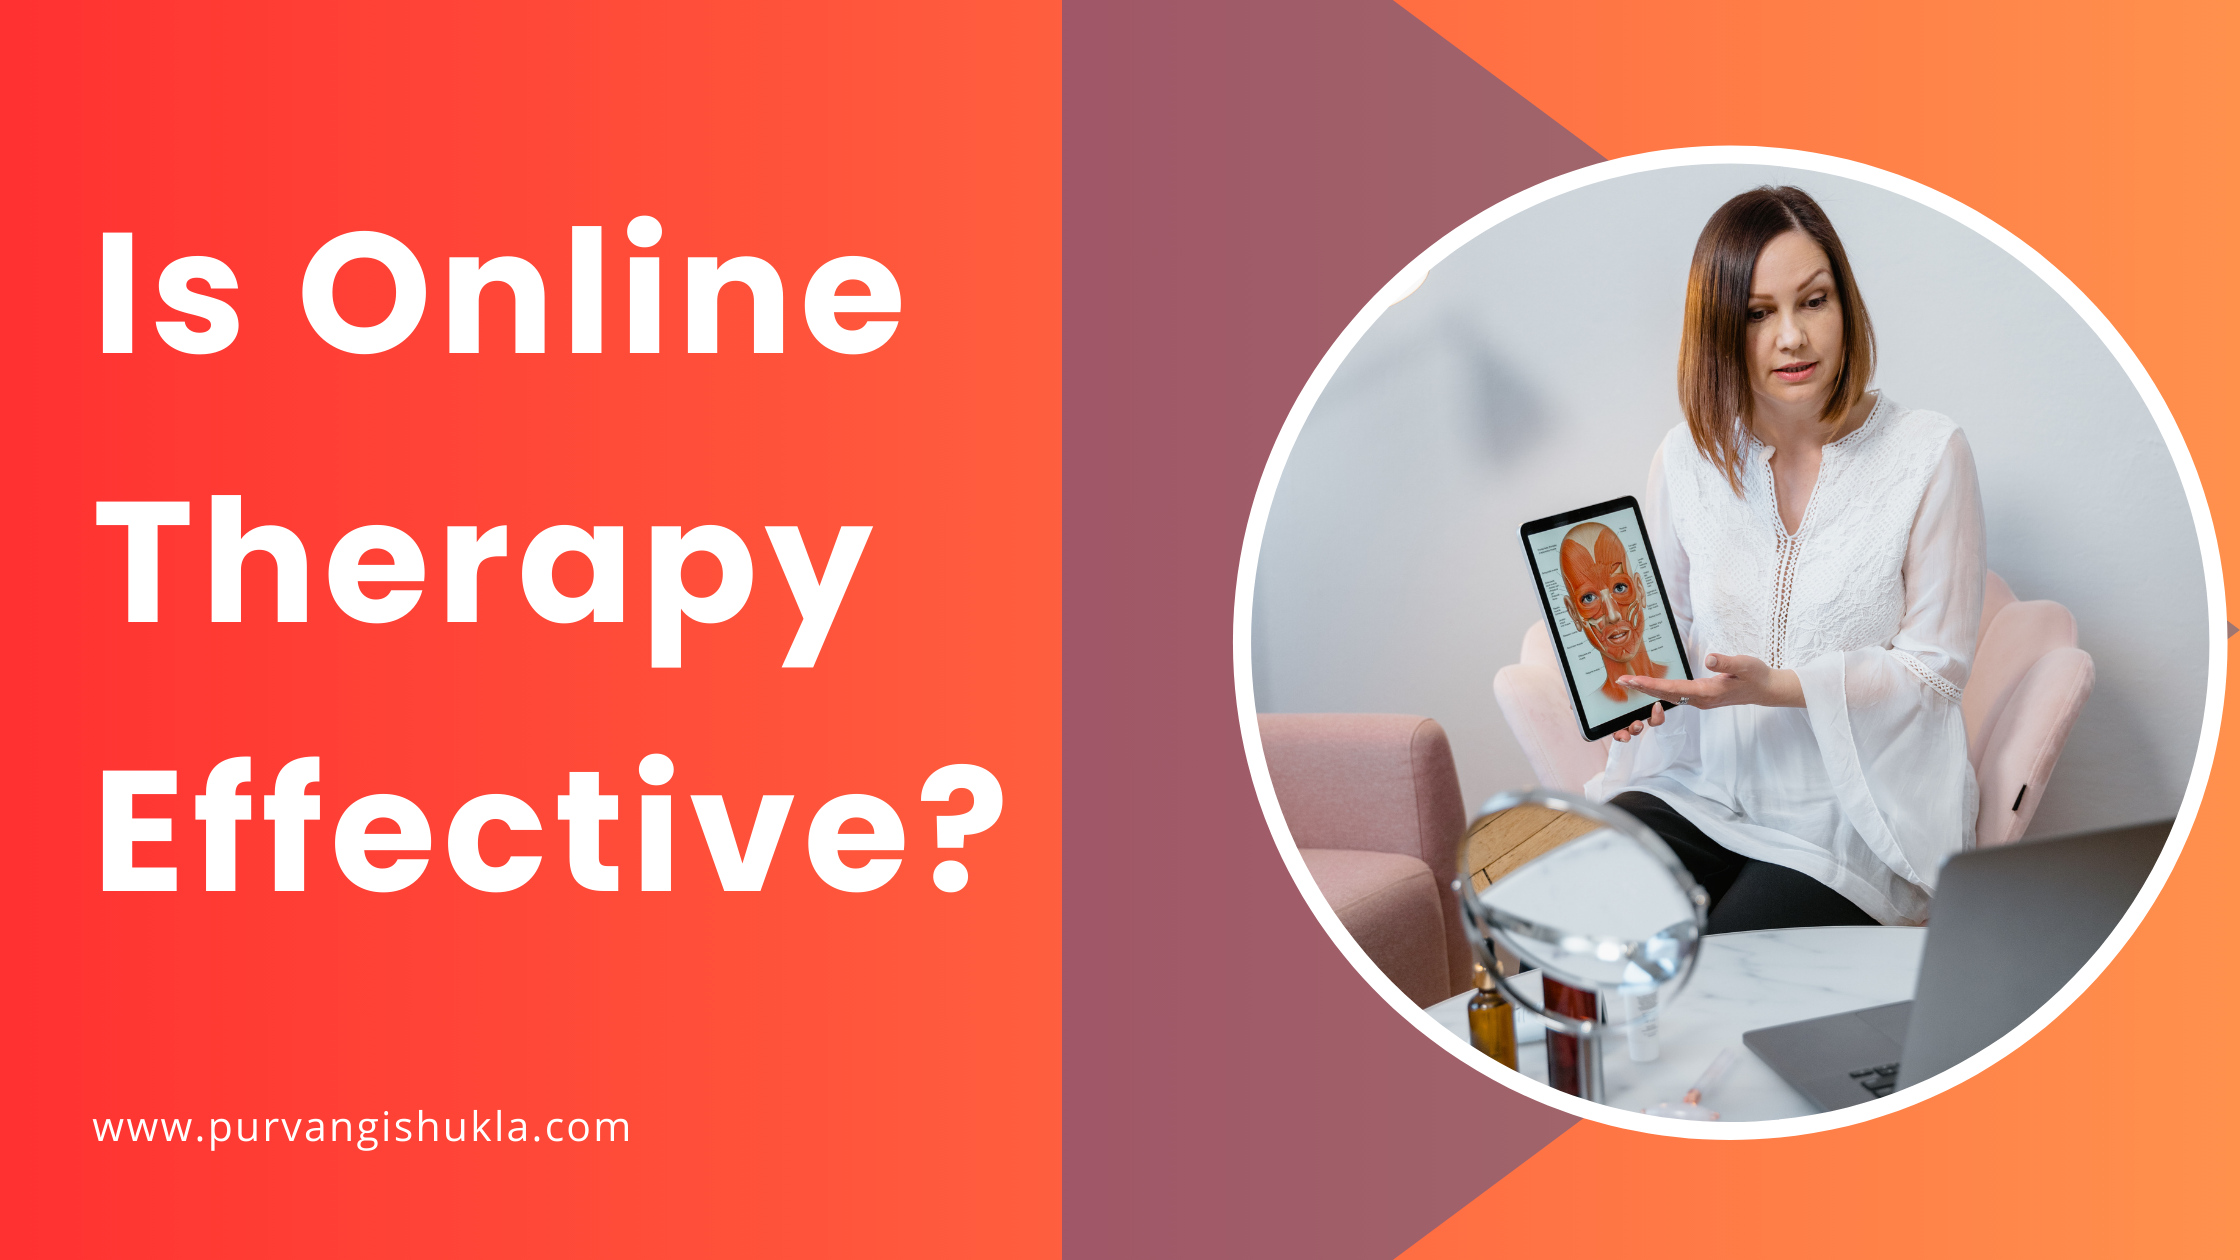 Is online therapy effective